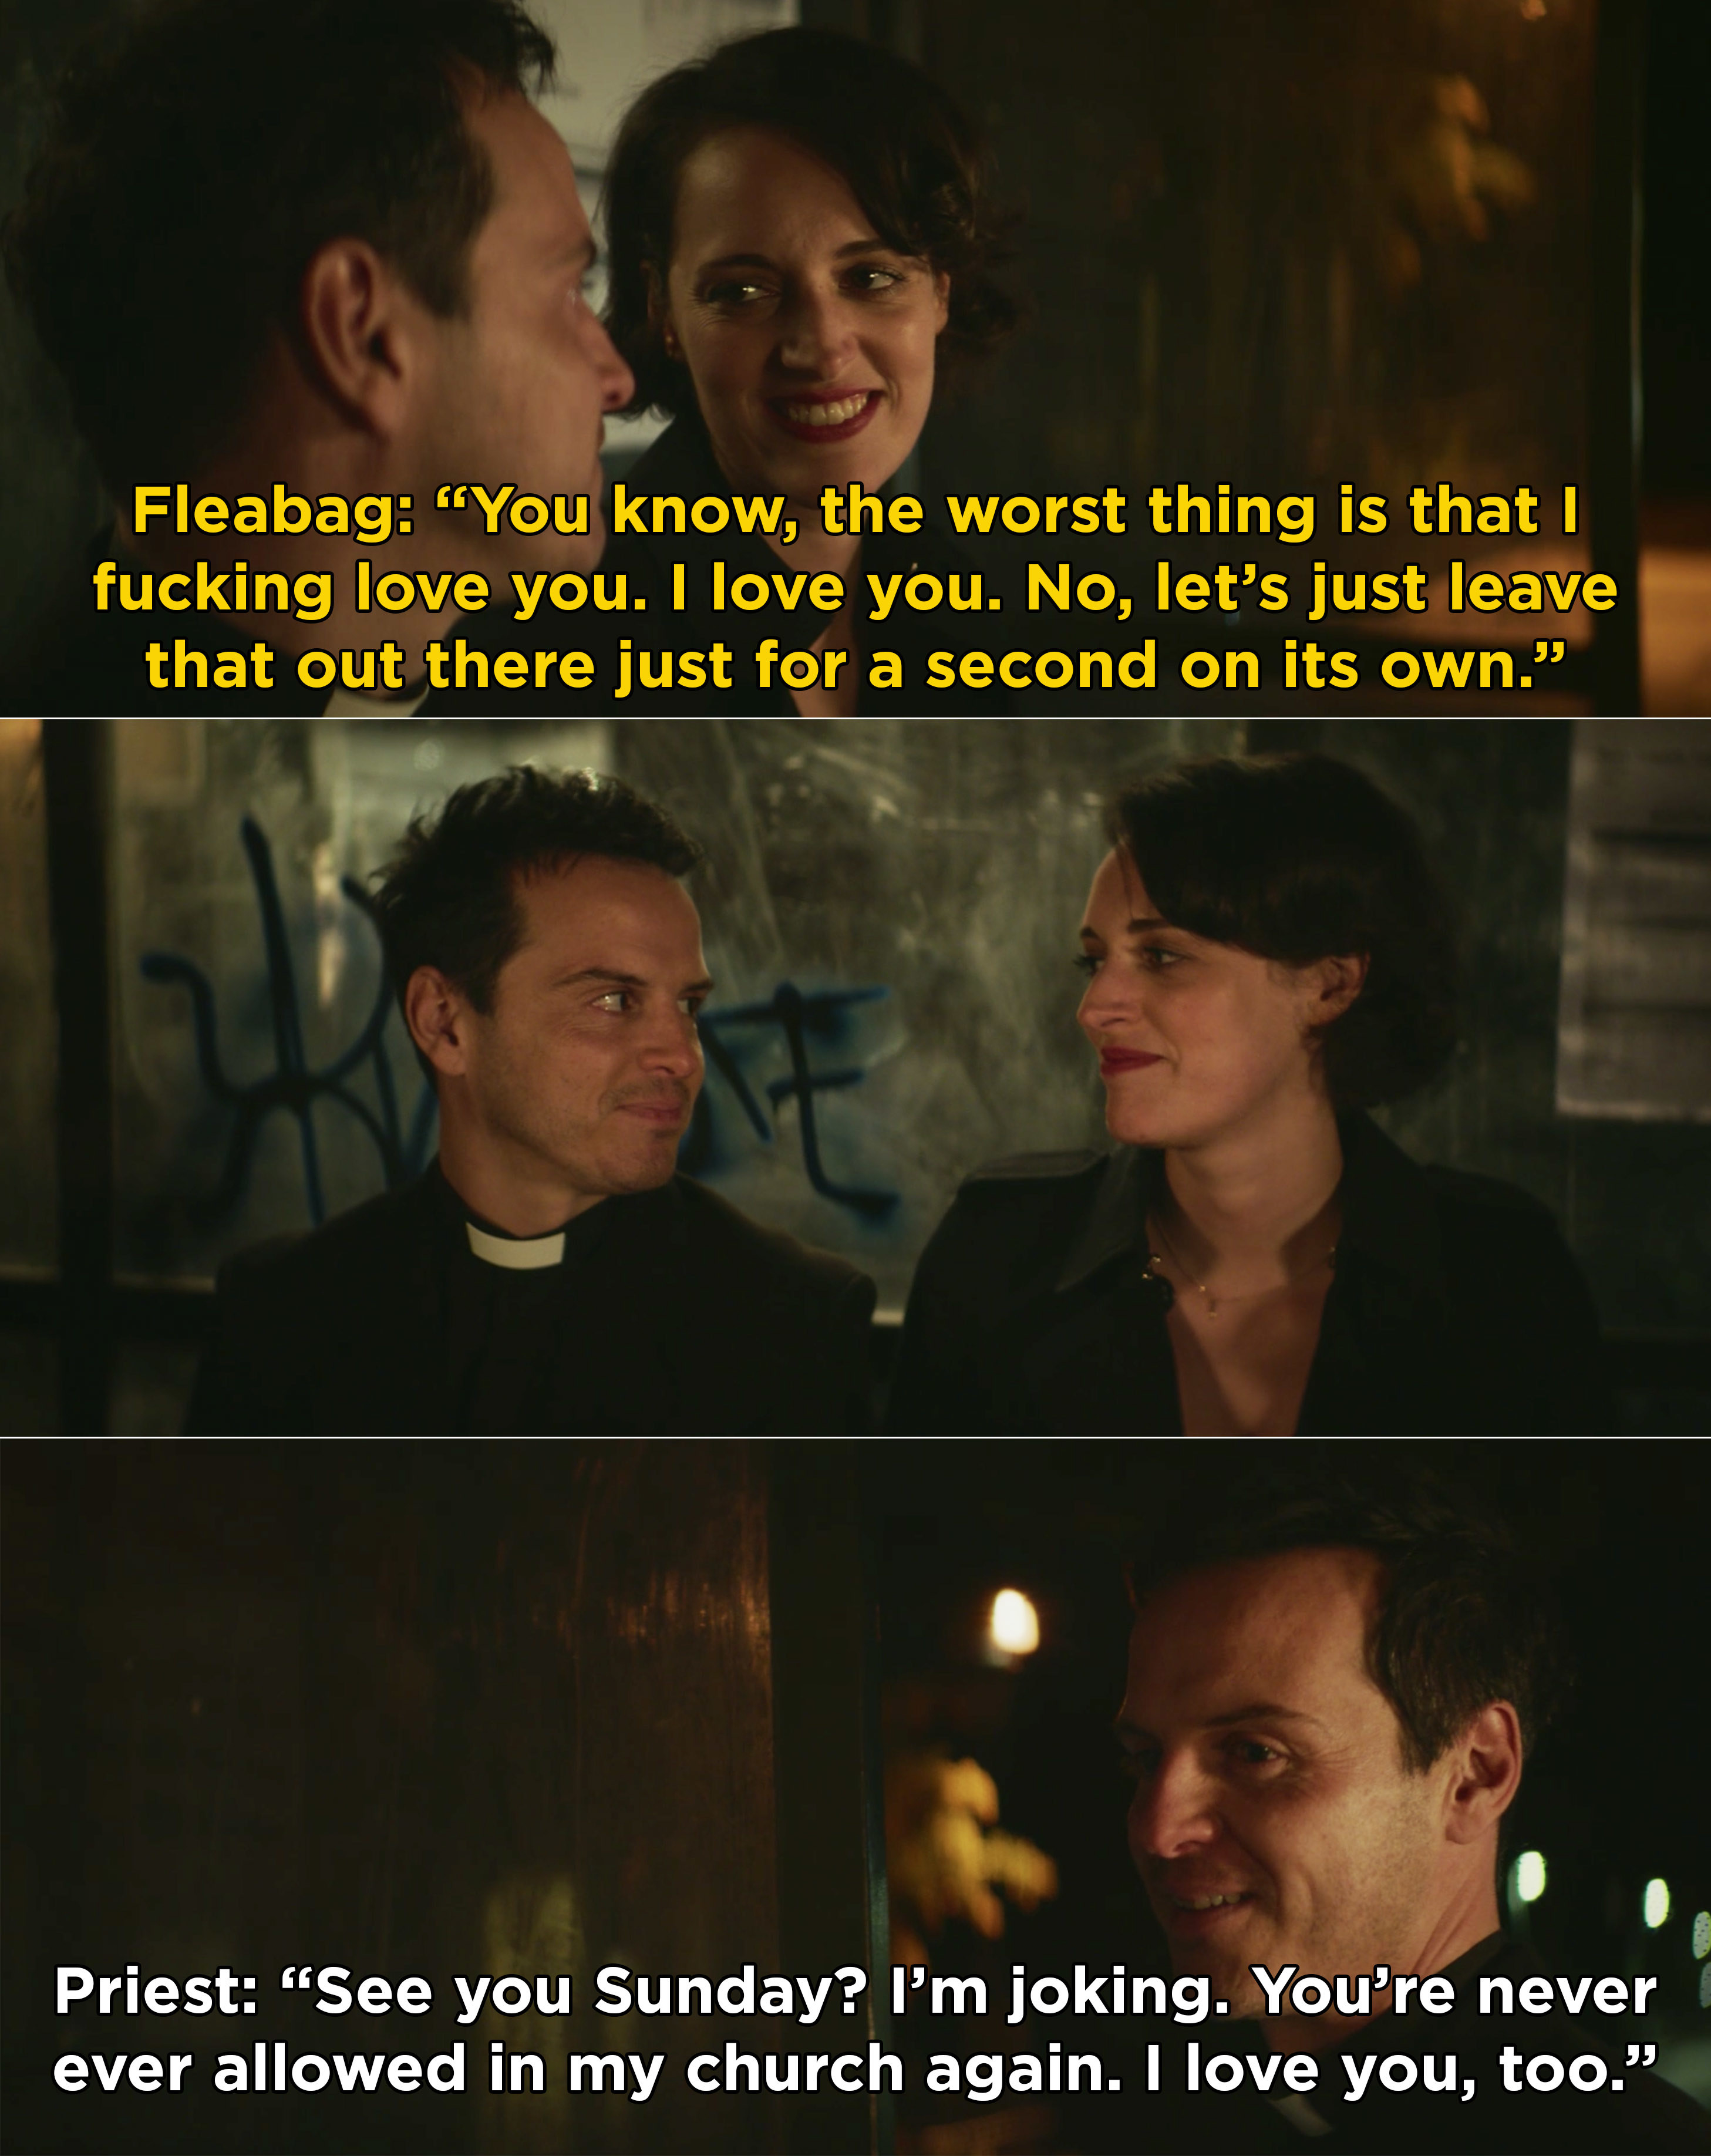 Fleabag telling the Priest that she loves him and the Priest saying he loves her too before leaving